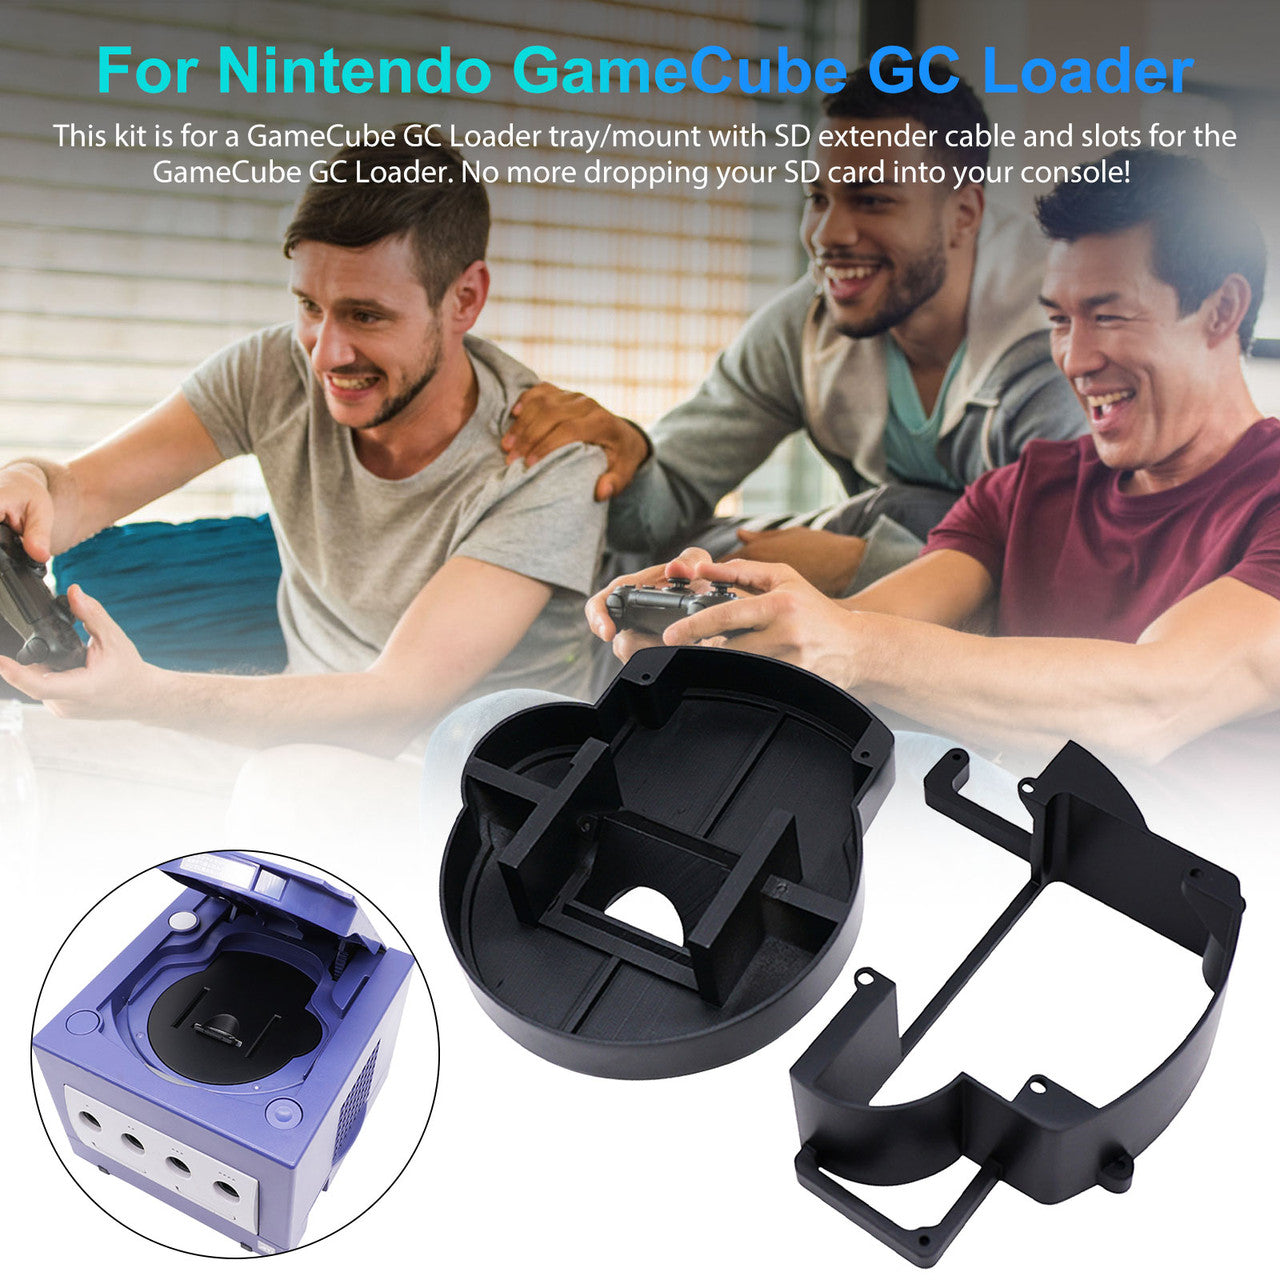 DIY Upgrade Nintendo GC Loader 3D Printed Tray/Mount Kit with SD Extension Cable, Slots & Screws